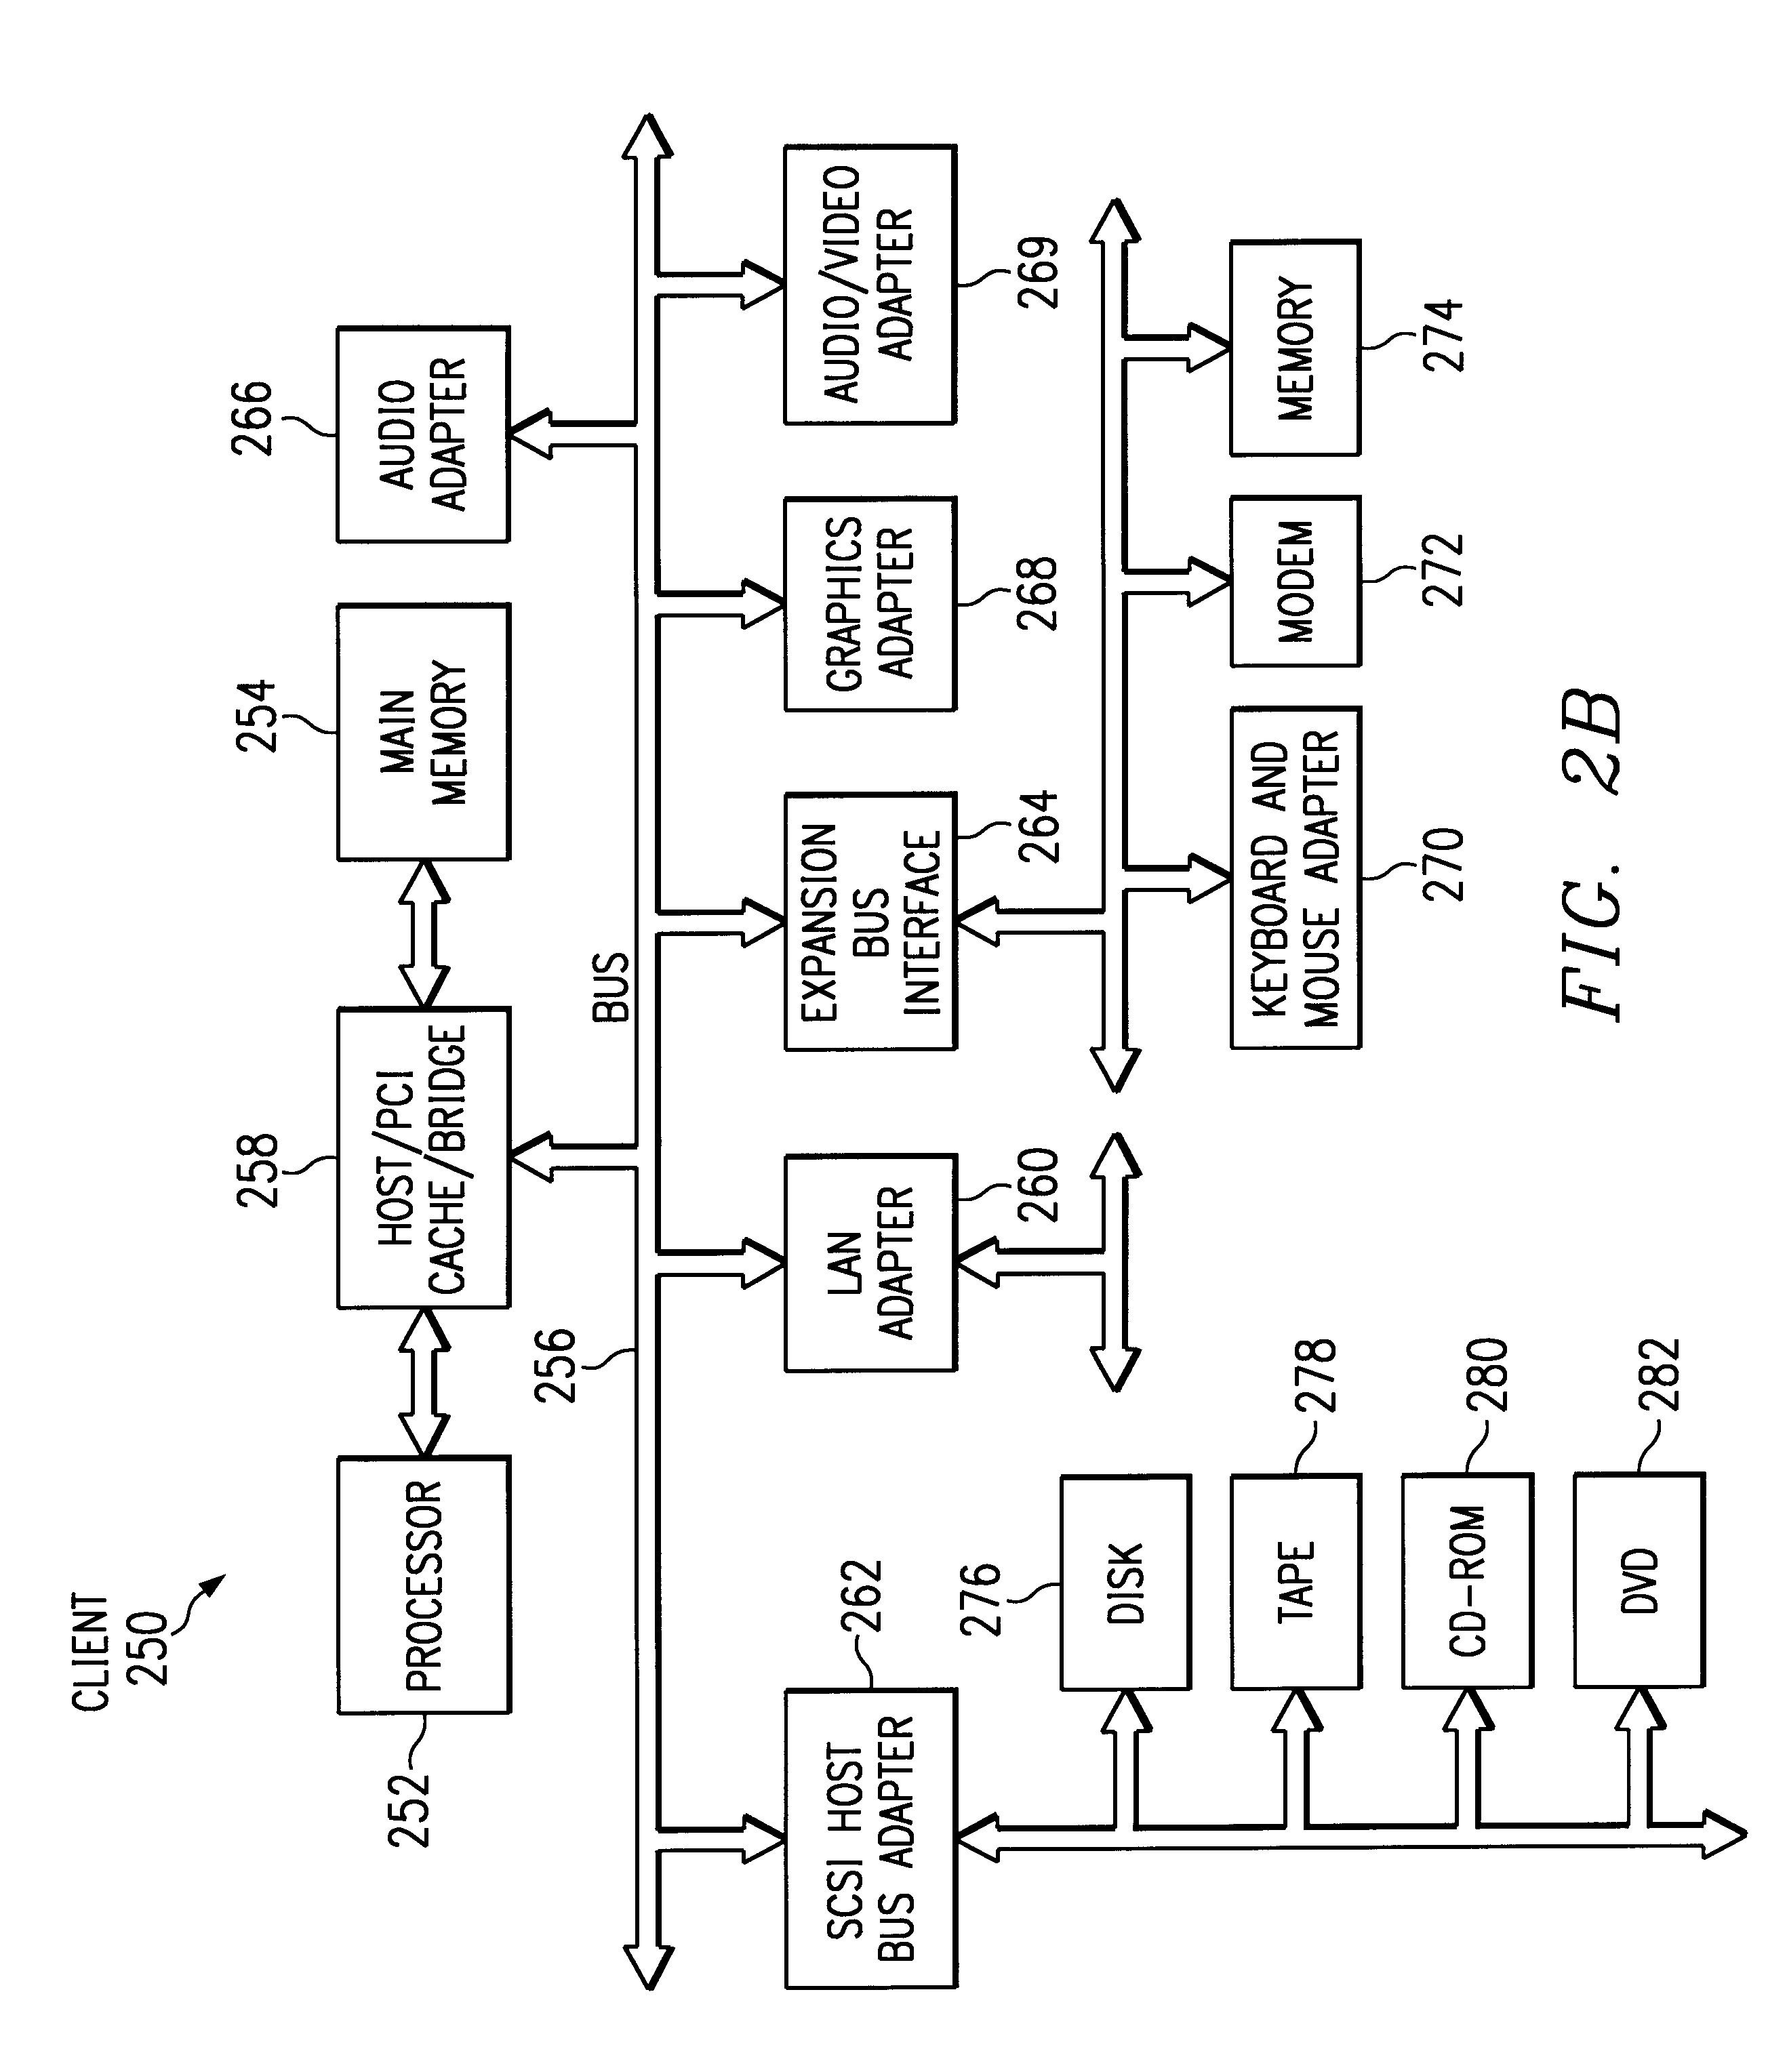 Method and system for merging event-based data and sampled data into postprocessed trace output